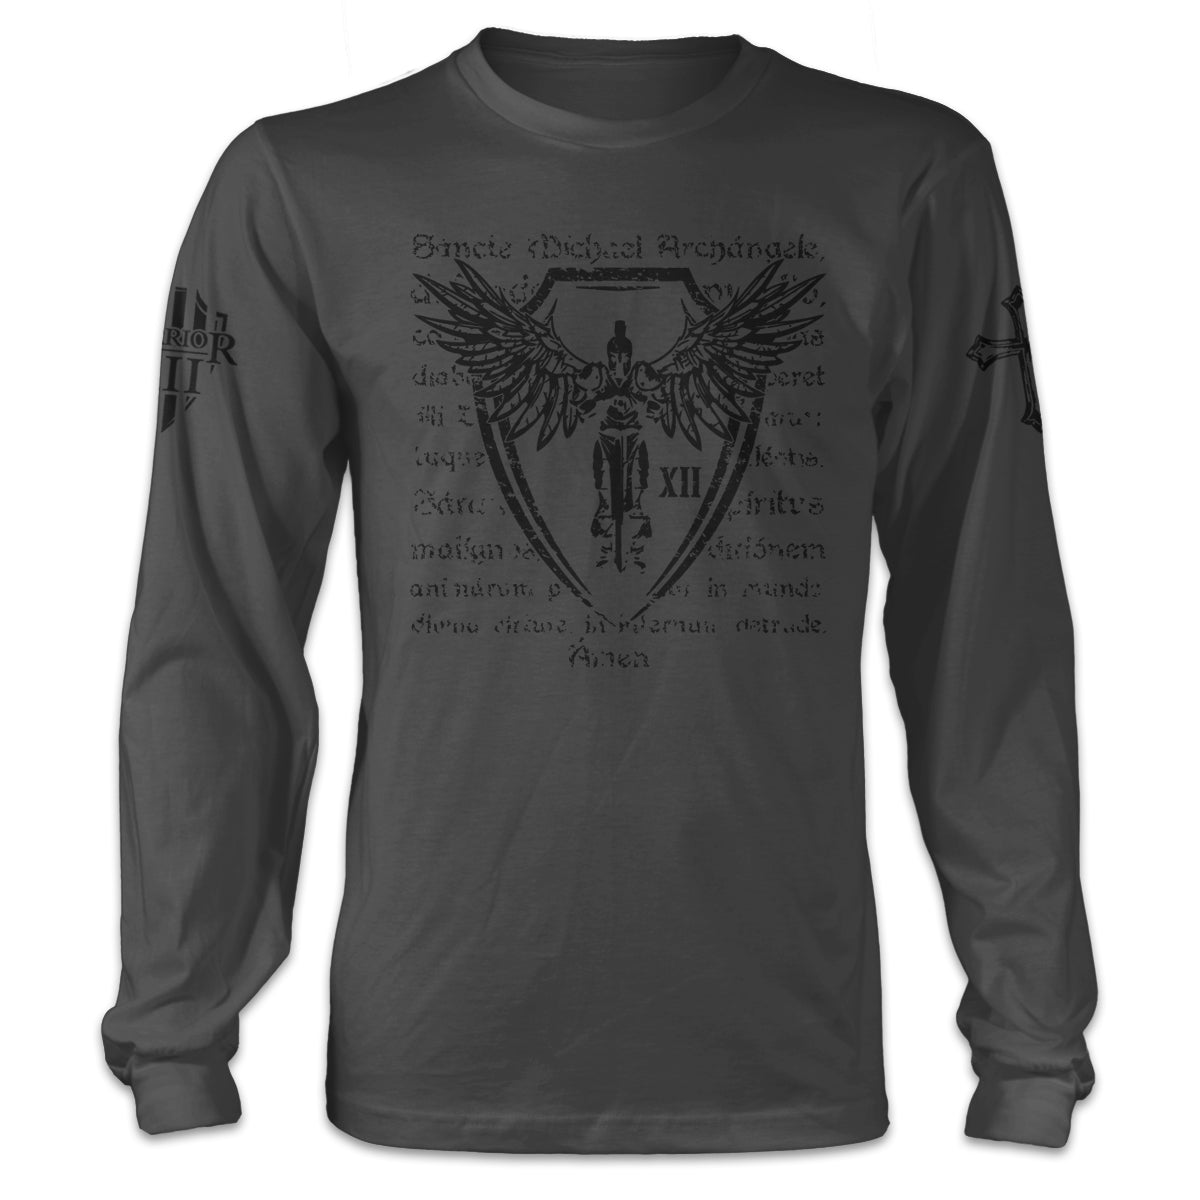 A grey long sleeve shirt with Saint Michael Archangel with wings and writing printed on the front.